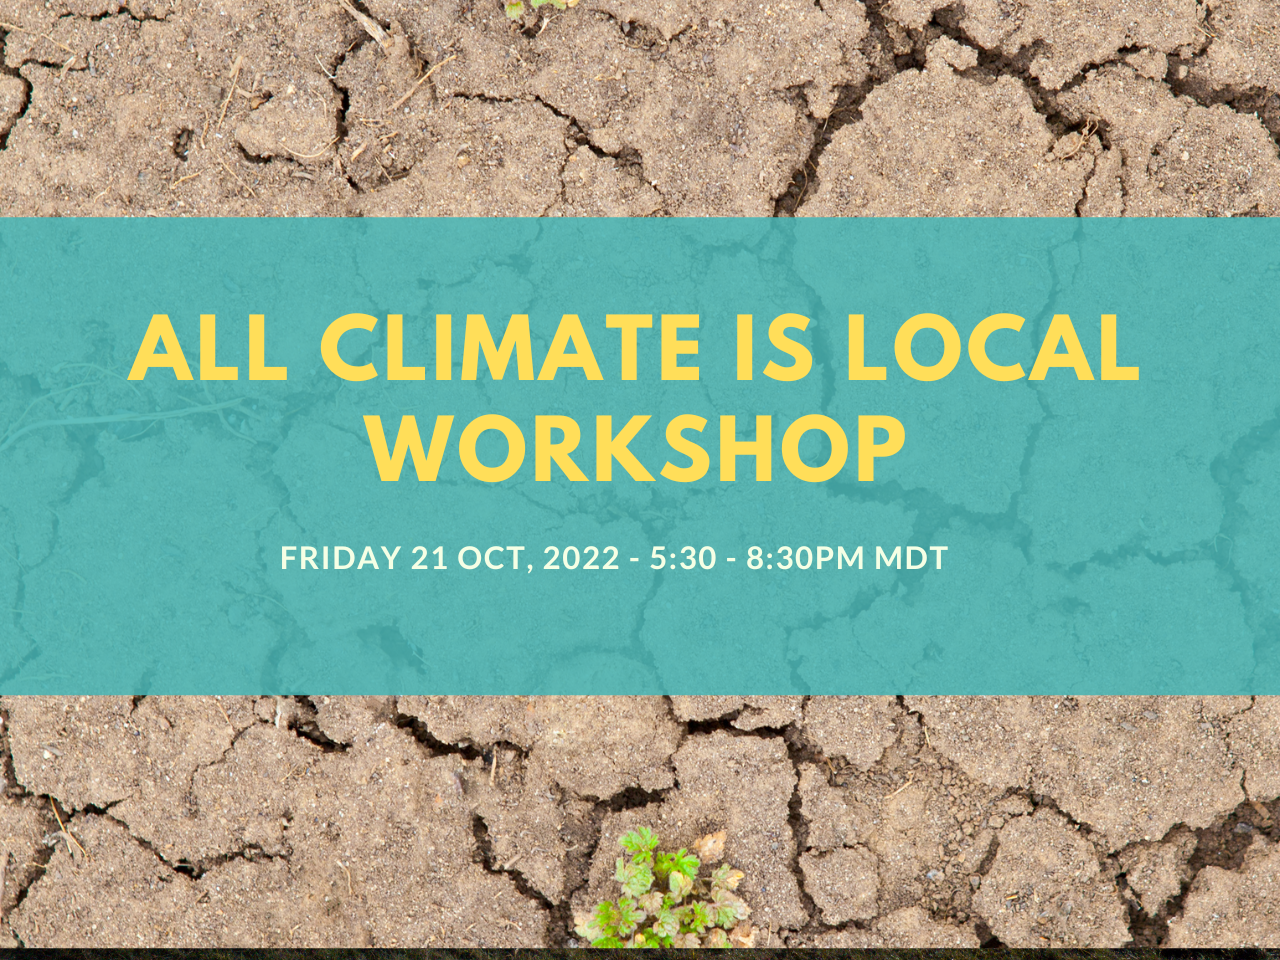 All climate is local workshop